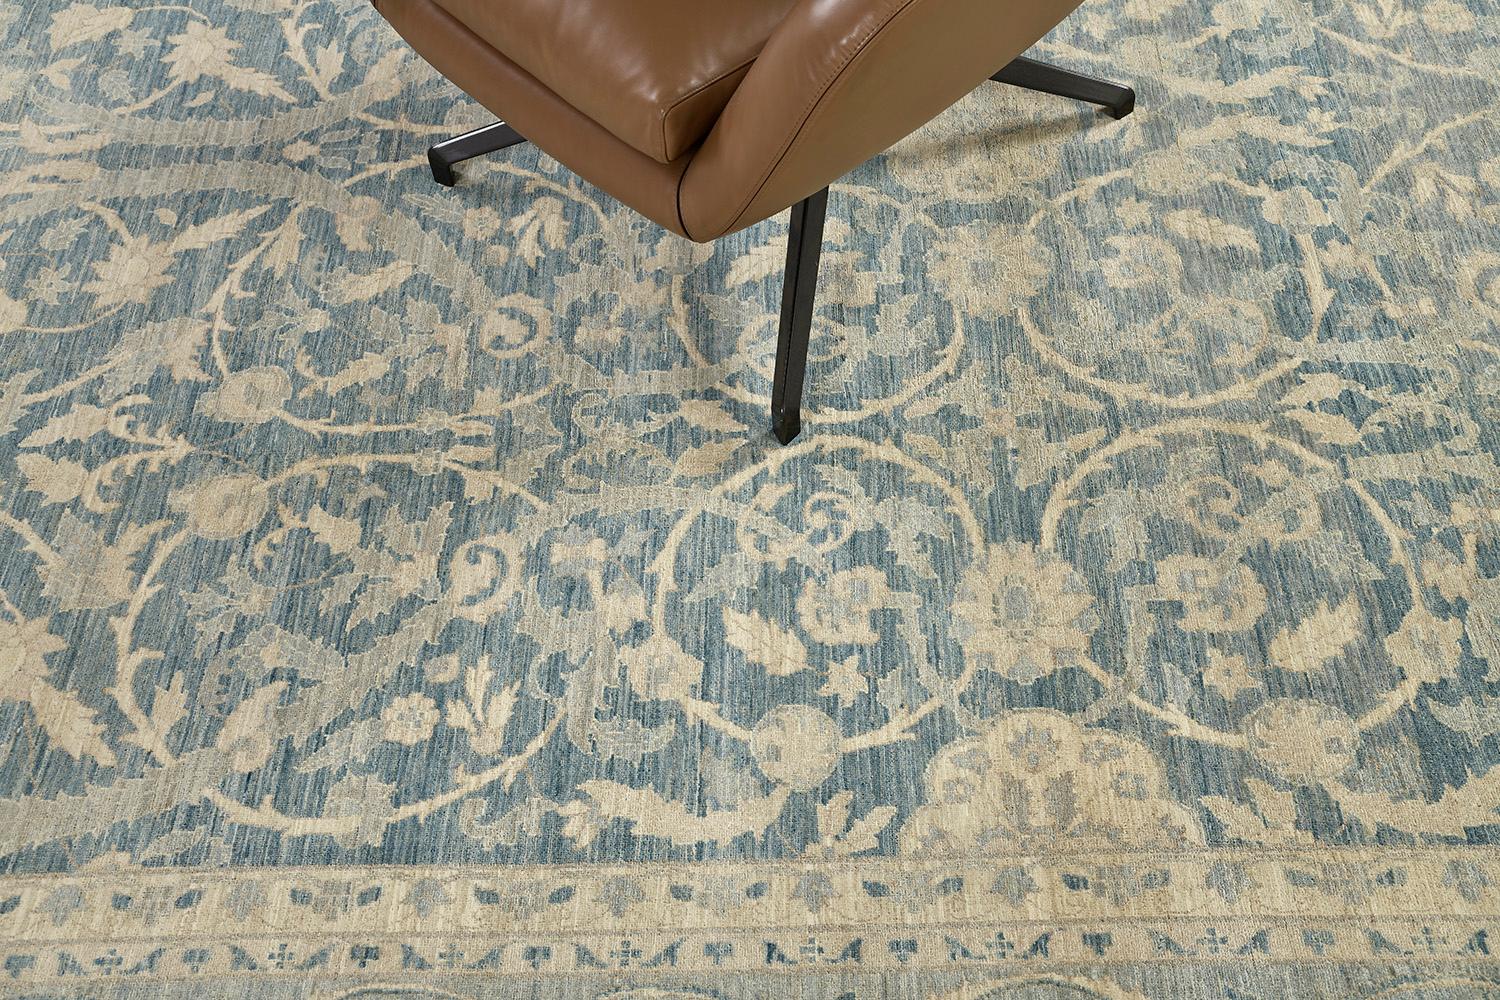 Lovely vines and florid adornments are expressed through gold embellishments to blooming and fascinating dusty blue fields. The borders are beautifully woven that created vigorously to form an elegant Zigler Rug. Truly an extraordinary creation that